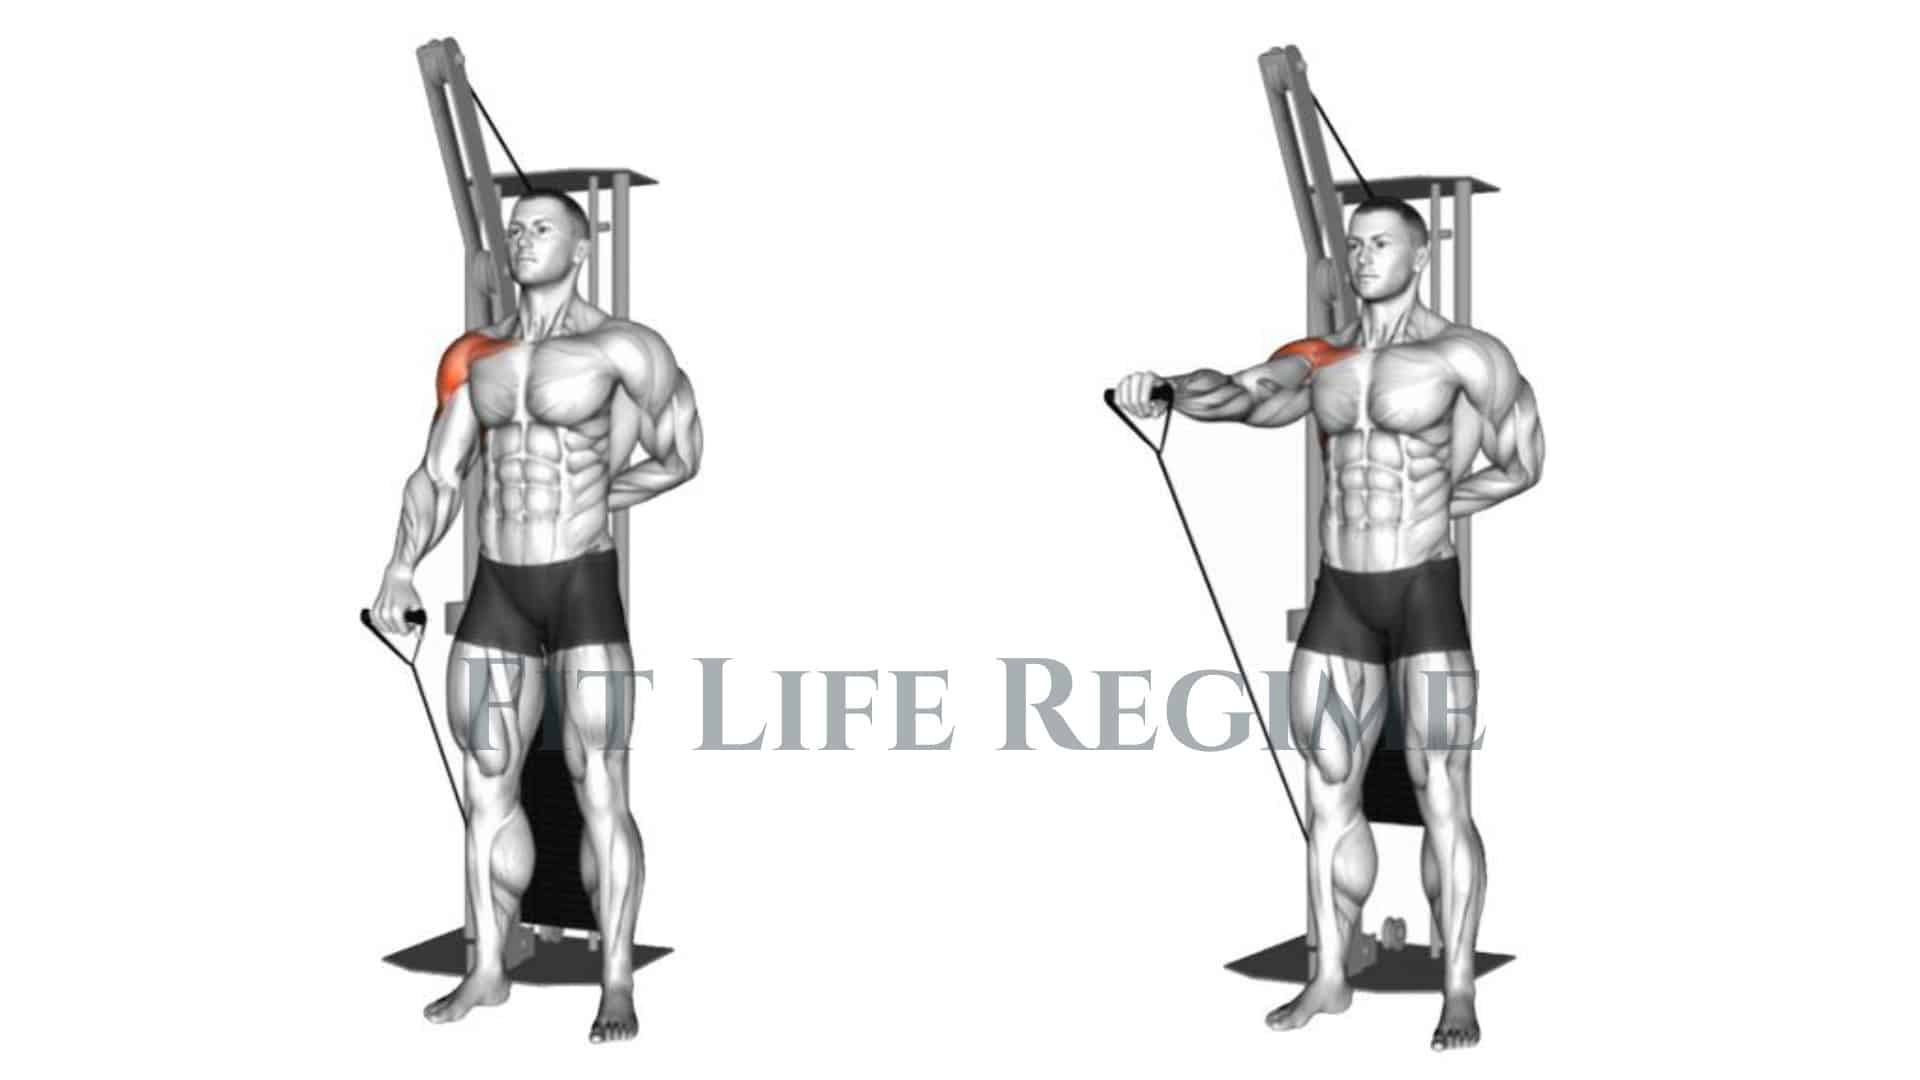 One Arm Cable Front Raise